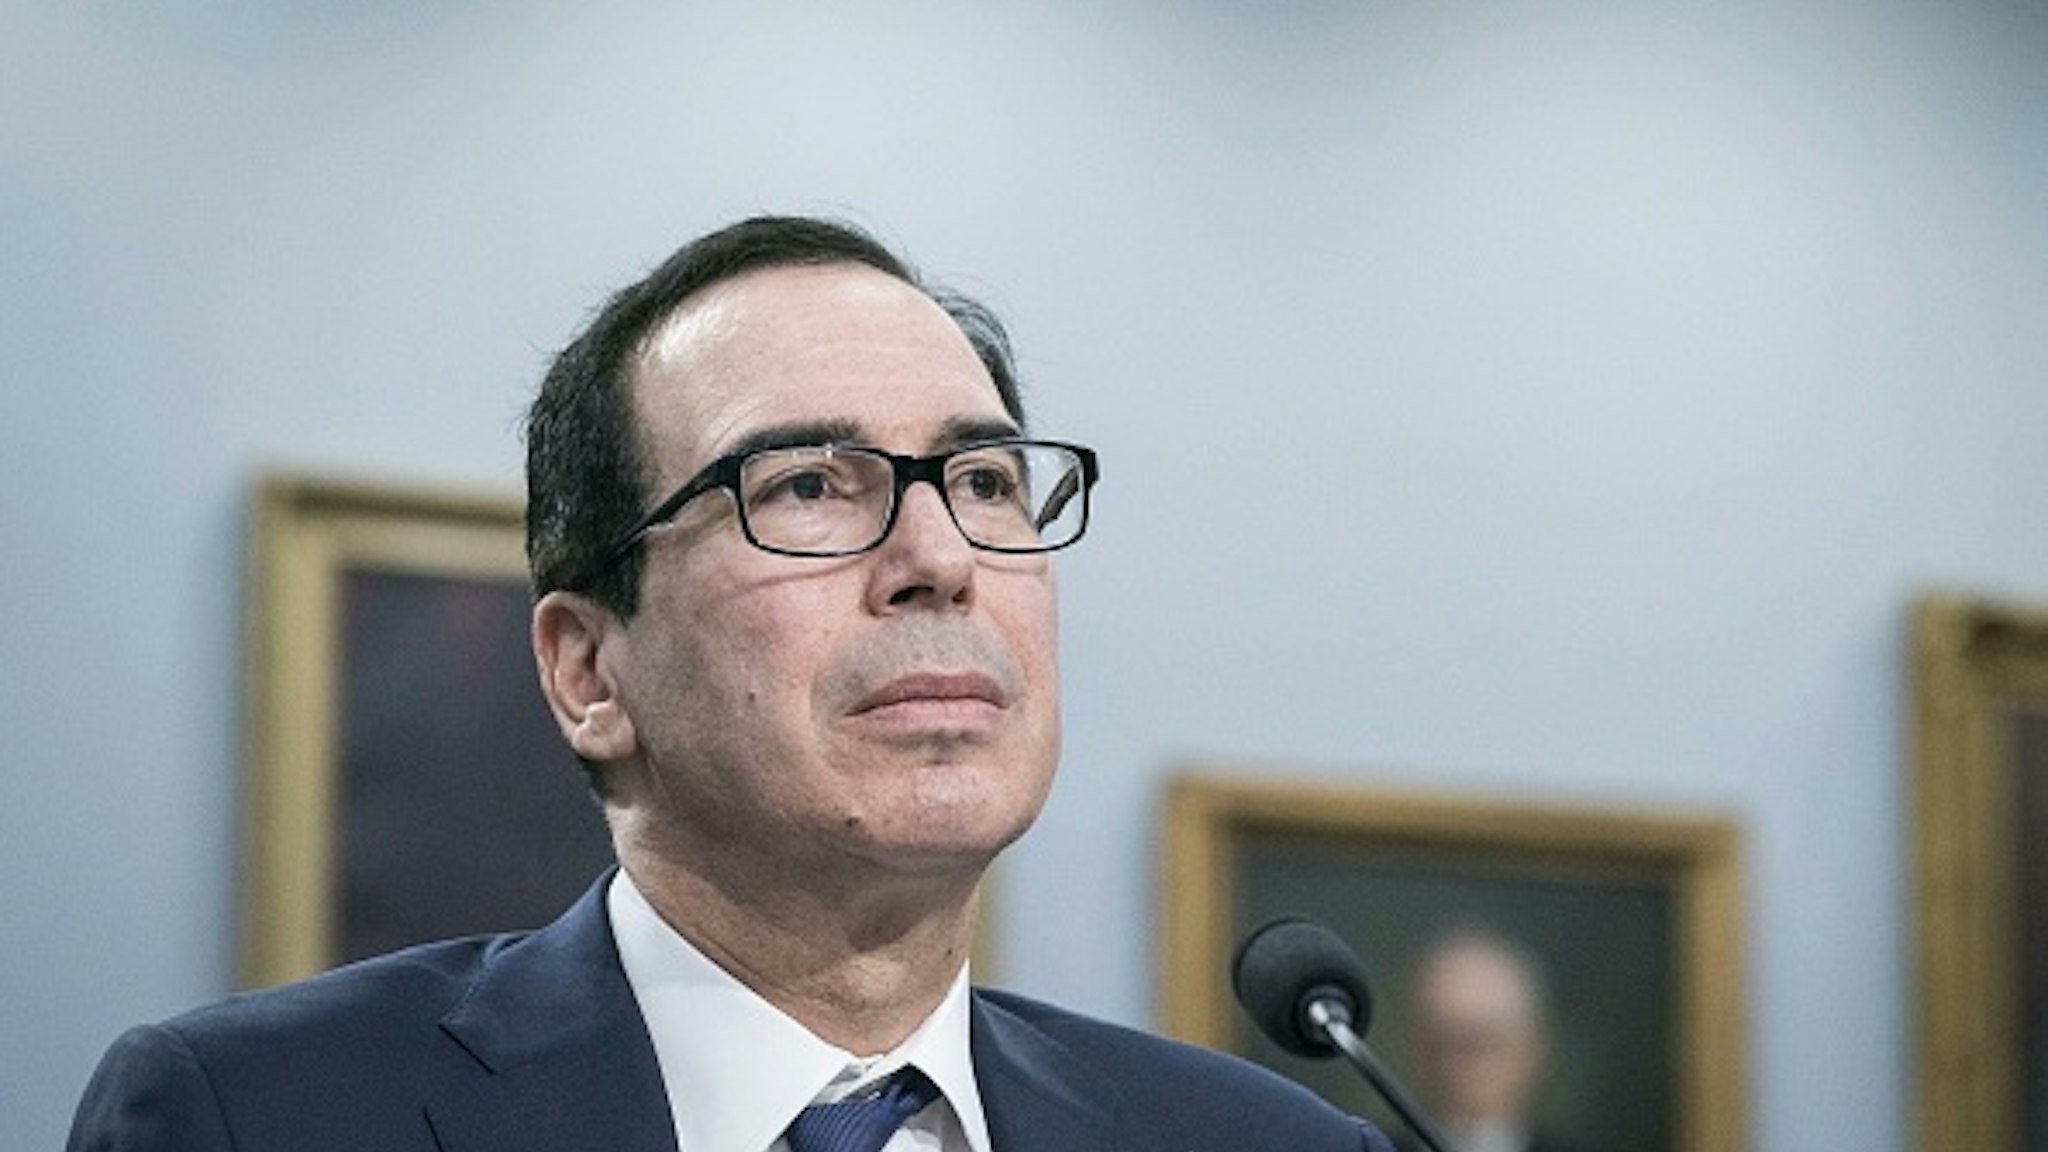 Steven Mnuchin, U.S. Treasury secretary, listens during a House Appropriations Committee hearing on Capitol Hill in Washington, D.C., U.S., on Wednesday, March 11, 2020. Mnuchin said he supports extending the 2019 tax-filing deadline beyond April 15 to provide relief from economic disruption caused by the coronavirus outbreak, and he'll recommend that step to President Donald Trump.